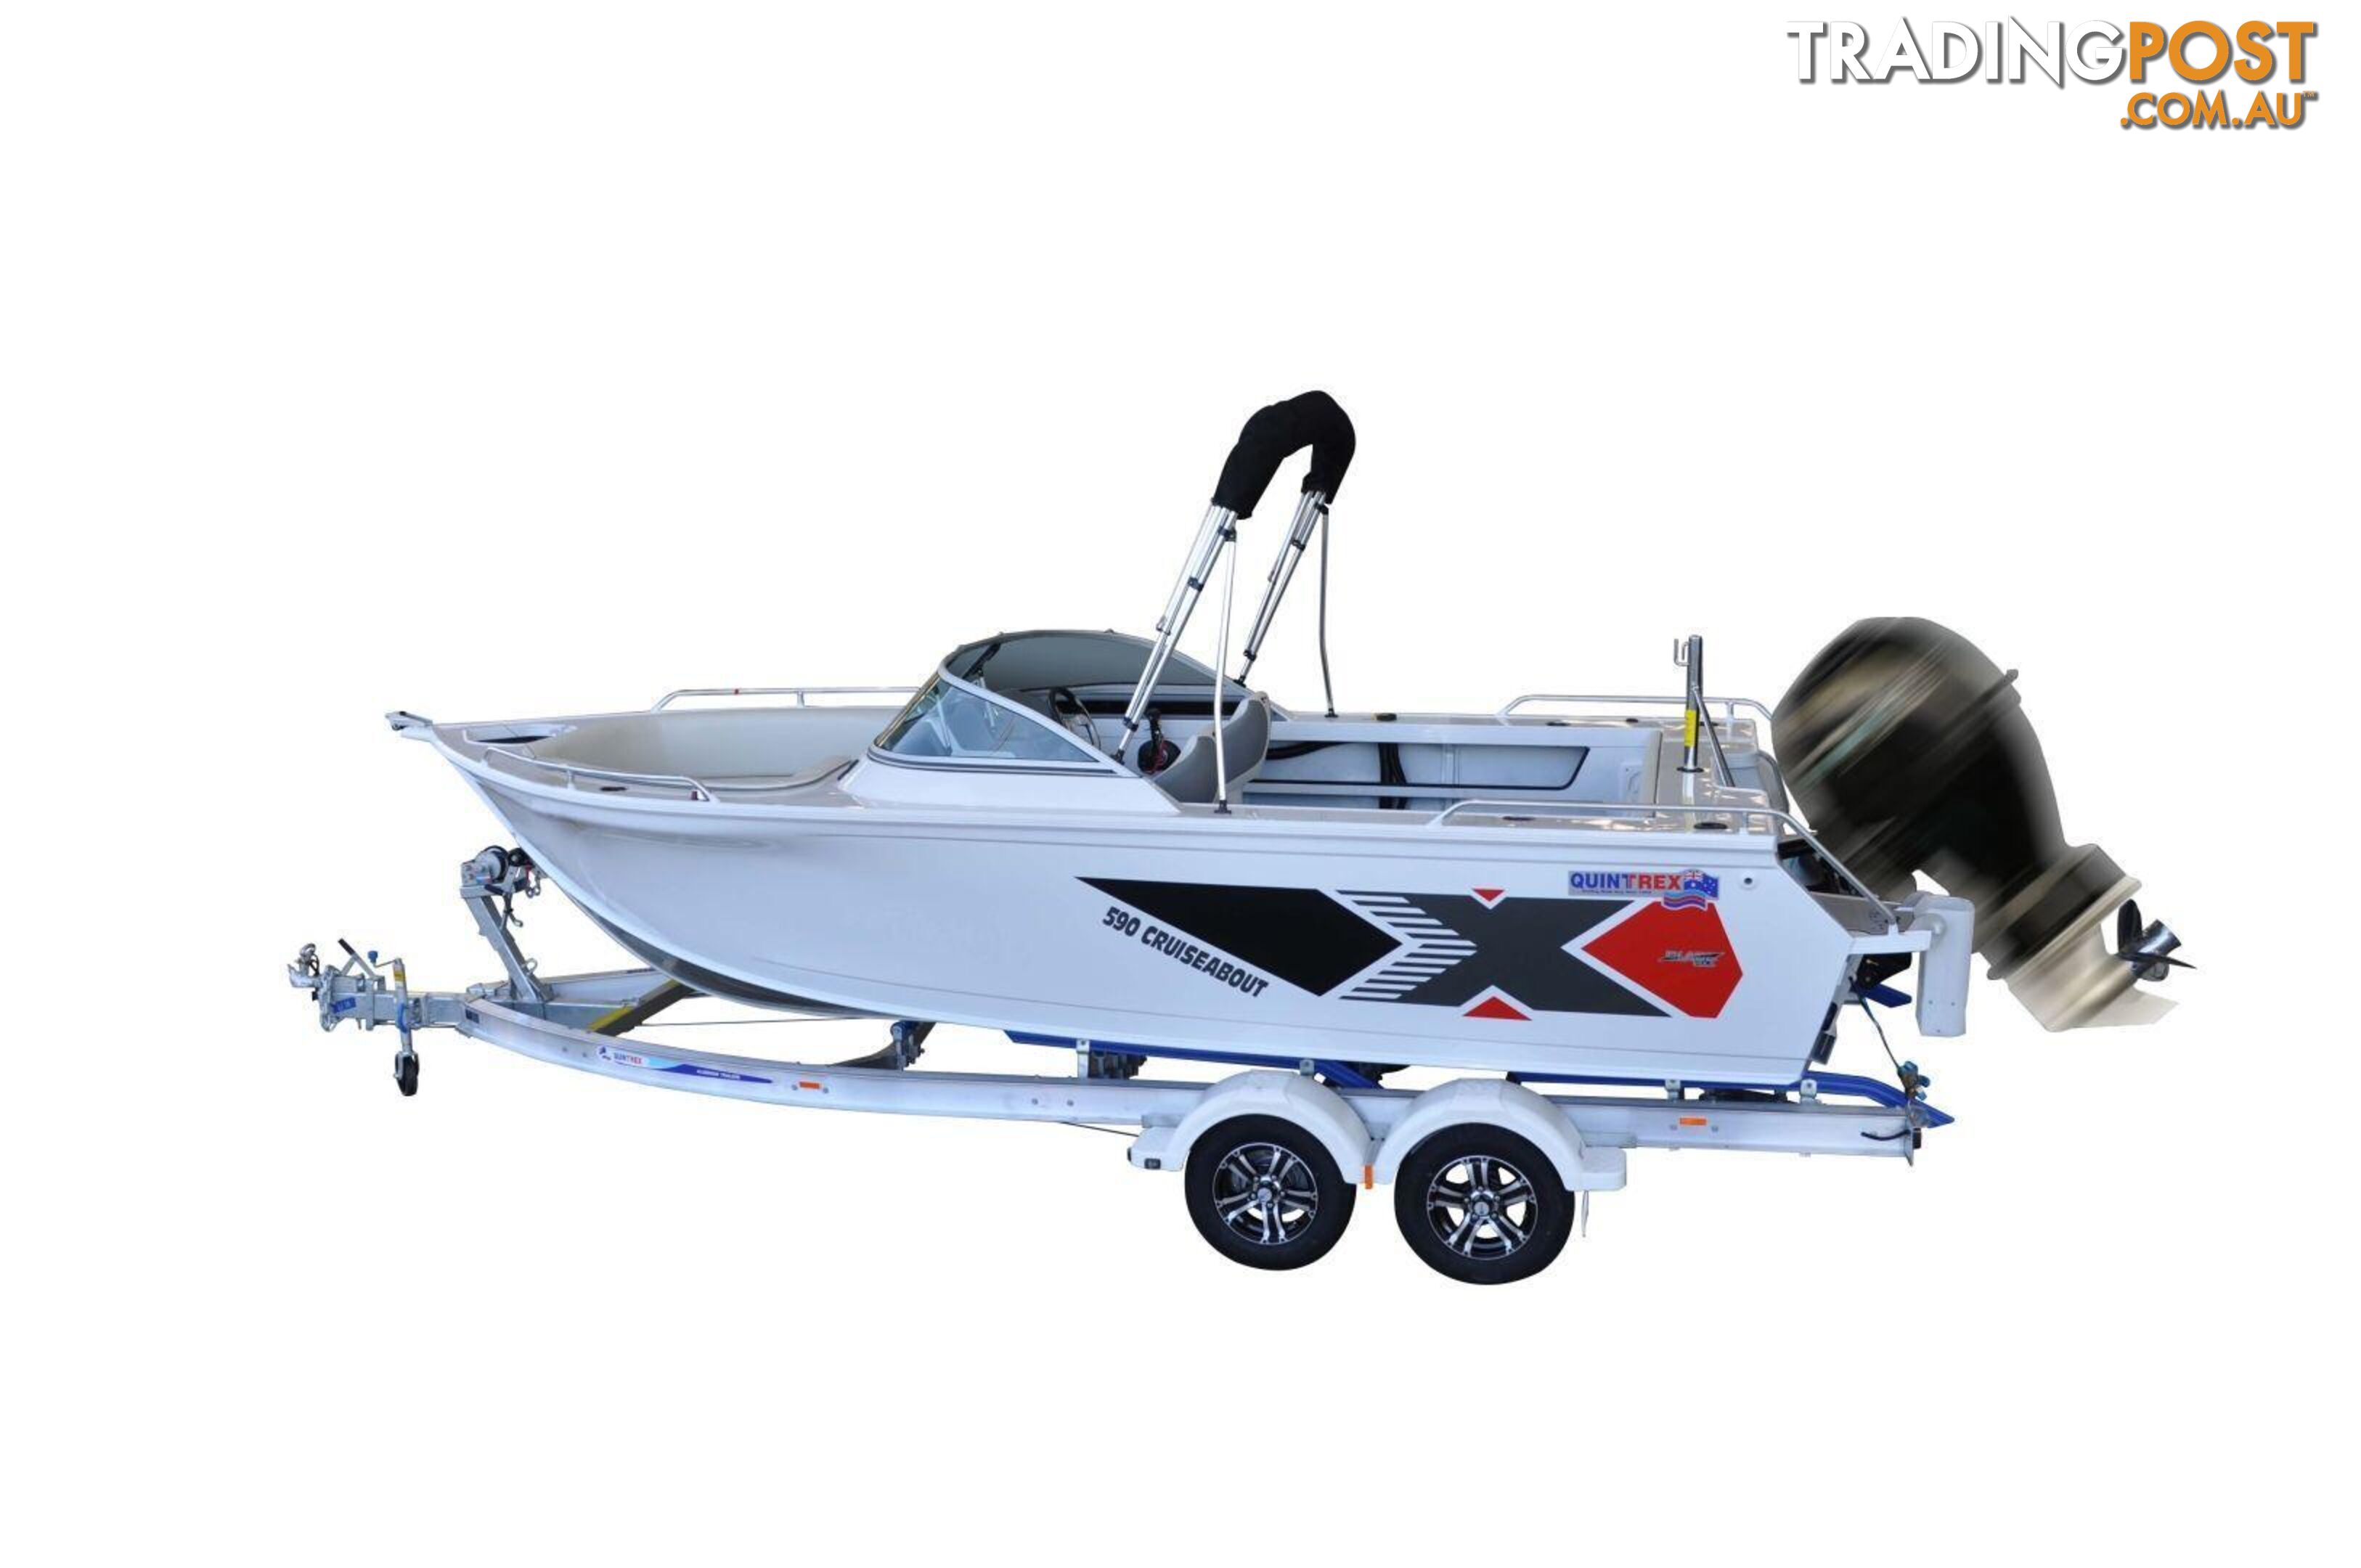 Quintrex 590 Cruiseabout + Yamaha F150hp 4-Stroke - Pack 2 for sale online prices